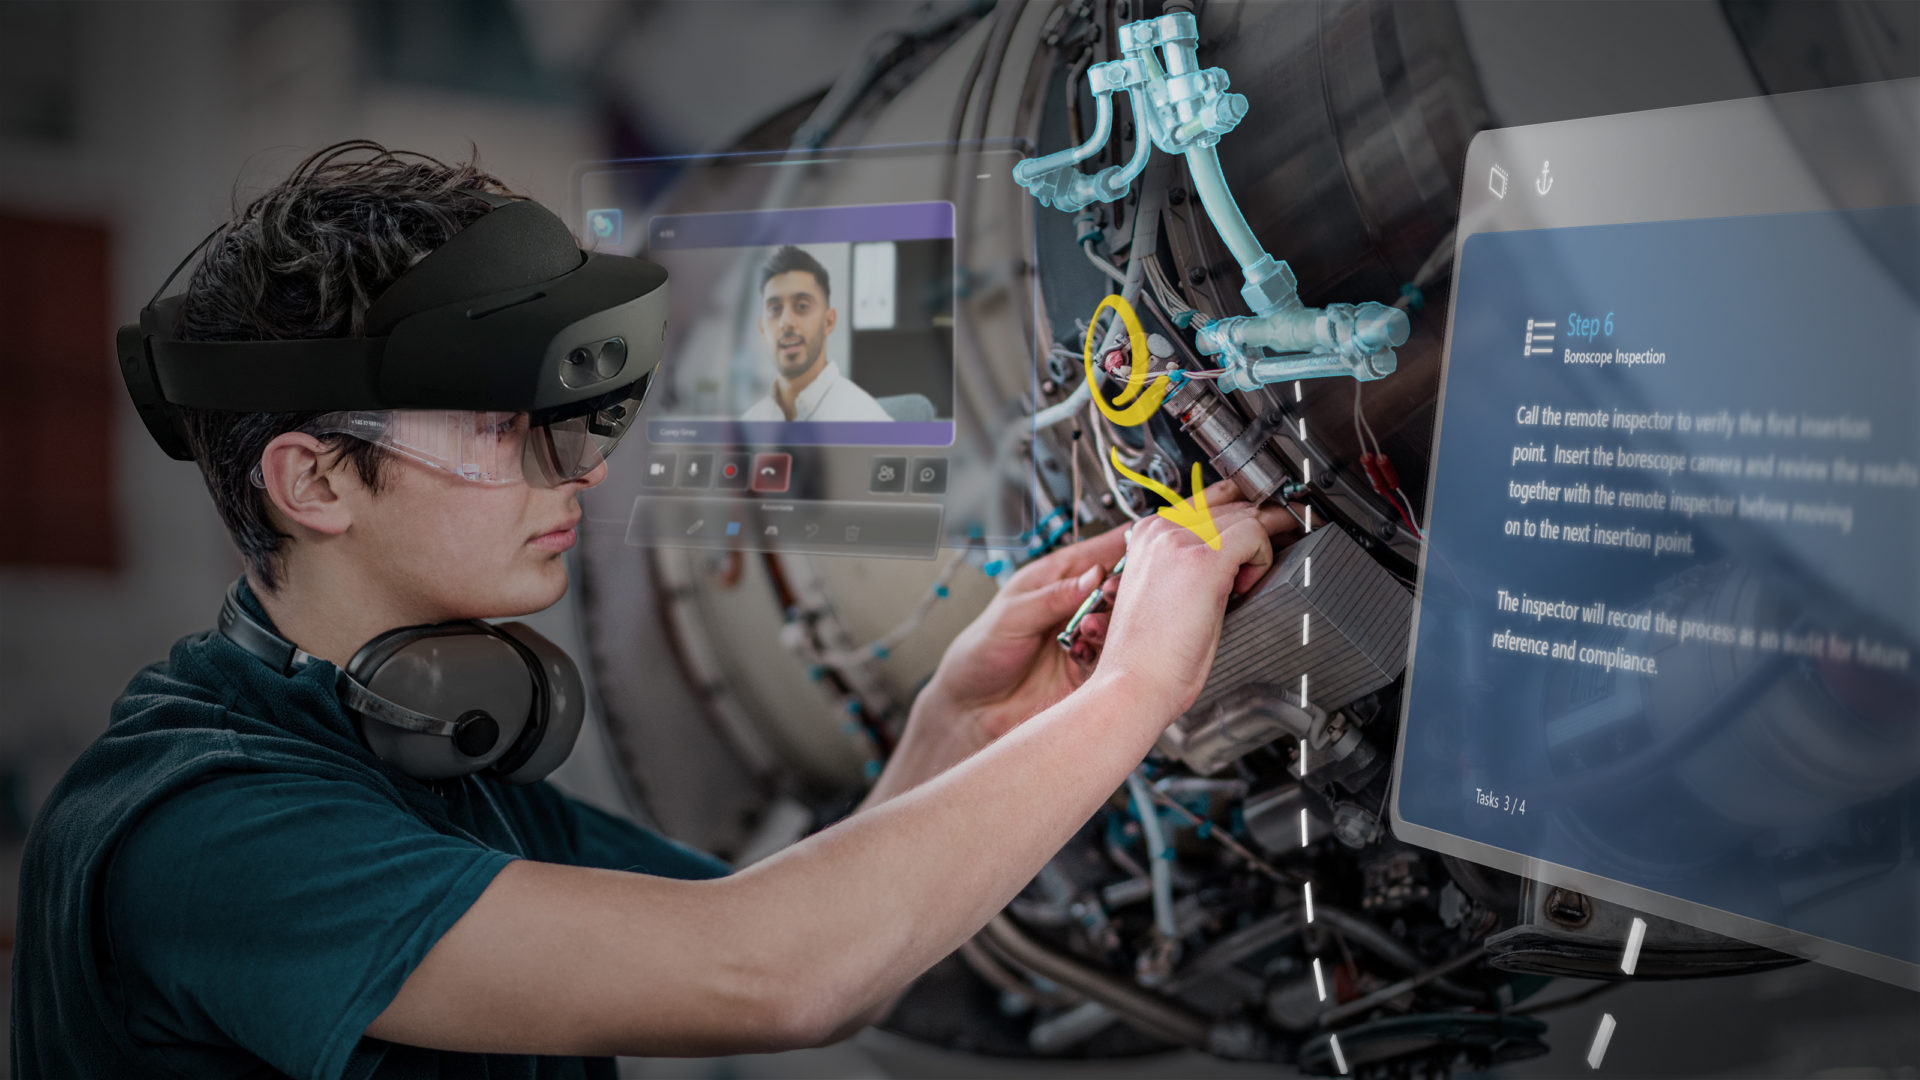 Using extended reality (XR) to learn skills in the aviation industry.